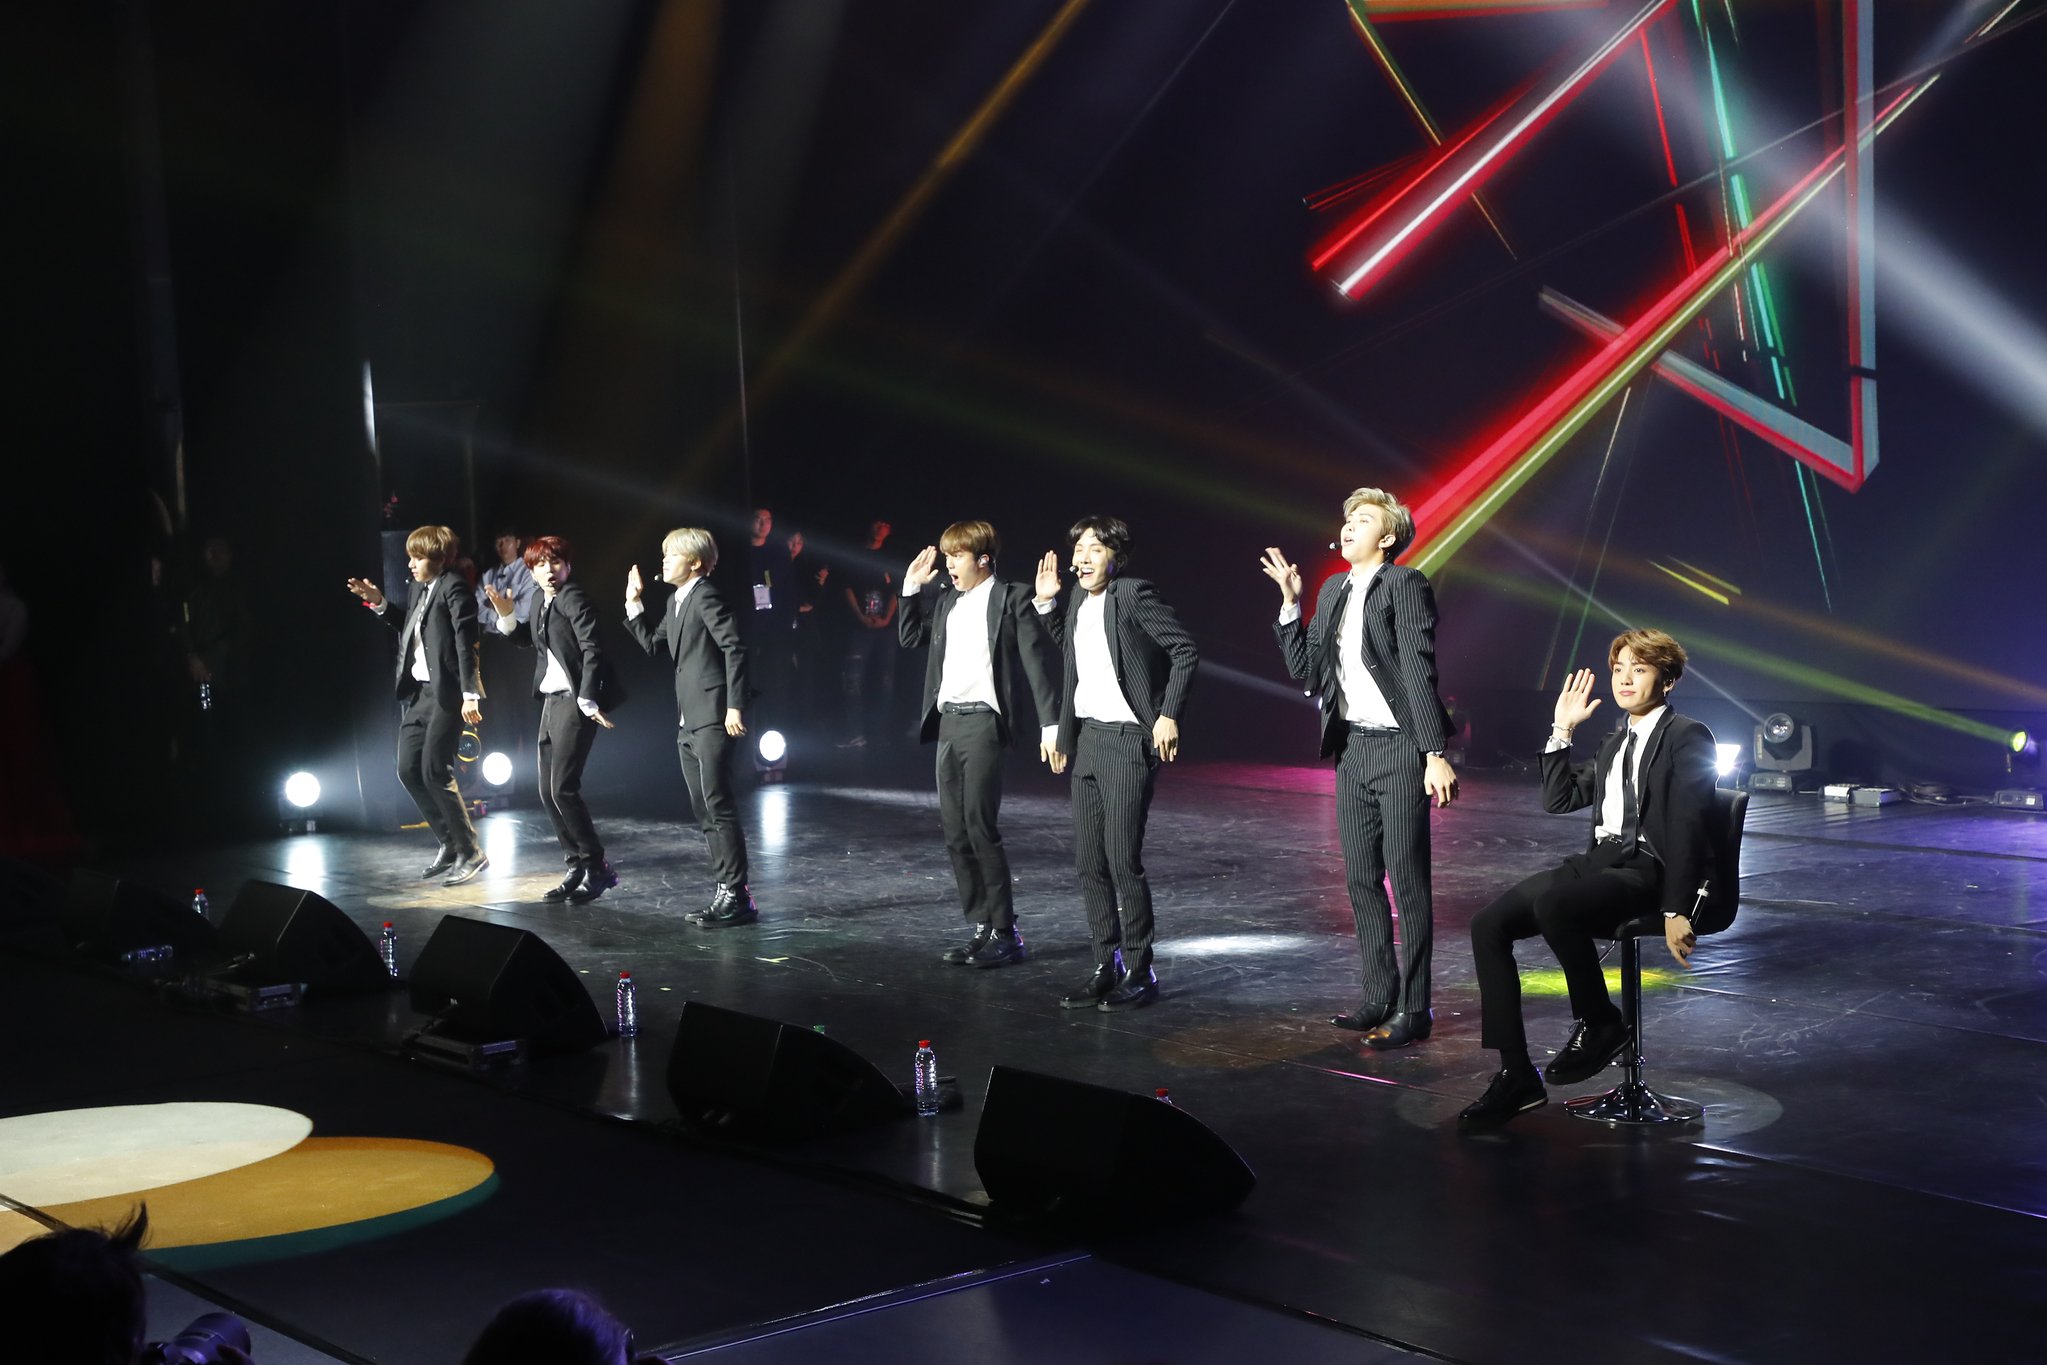 BTS performed on the stage of Hanbul Friendship Concert held at the Paris Tresium Art Theater on the day.The concert began at 4:15 p.m. (local time) with a traditional Korean music performance by the National Center for Korean Traditional Performing Arts, followed by a K-POP performance at 4:59 p.m., followed by BTS performances.I am truly honored to be able to attend meaningful events in Paris, the BTS said after the performance.After all the performances were over at around 5 p.m., President Moon shook hands with artists and greeted them, even hugging BTS RM (real name Kim Nam-joon).Cheong Wa Dae said, This concert was designed to promote cultural exchanges between the two countries and to create a friendly atmosphere between Korea and France with President Moons visit to France.The concert was attended by more than 400 people including major figures from France, business circles, cultural and artistic personnel, Korean Wave lovers, and Korean students from seven universities in Paris.Meanwhile, President Moon is on a state visit to France, the first visit to Europe on July 7 and 9. He will hold a Summit with President Macron on the 15th.